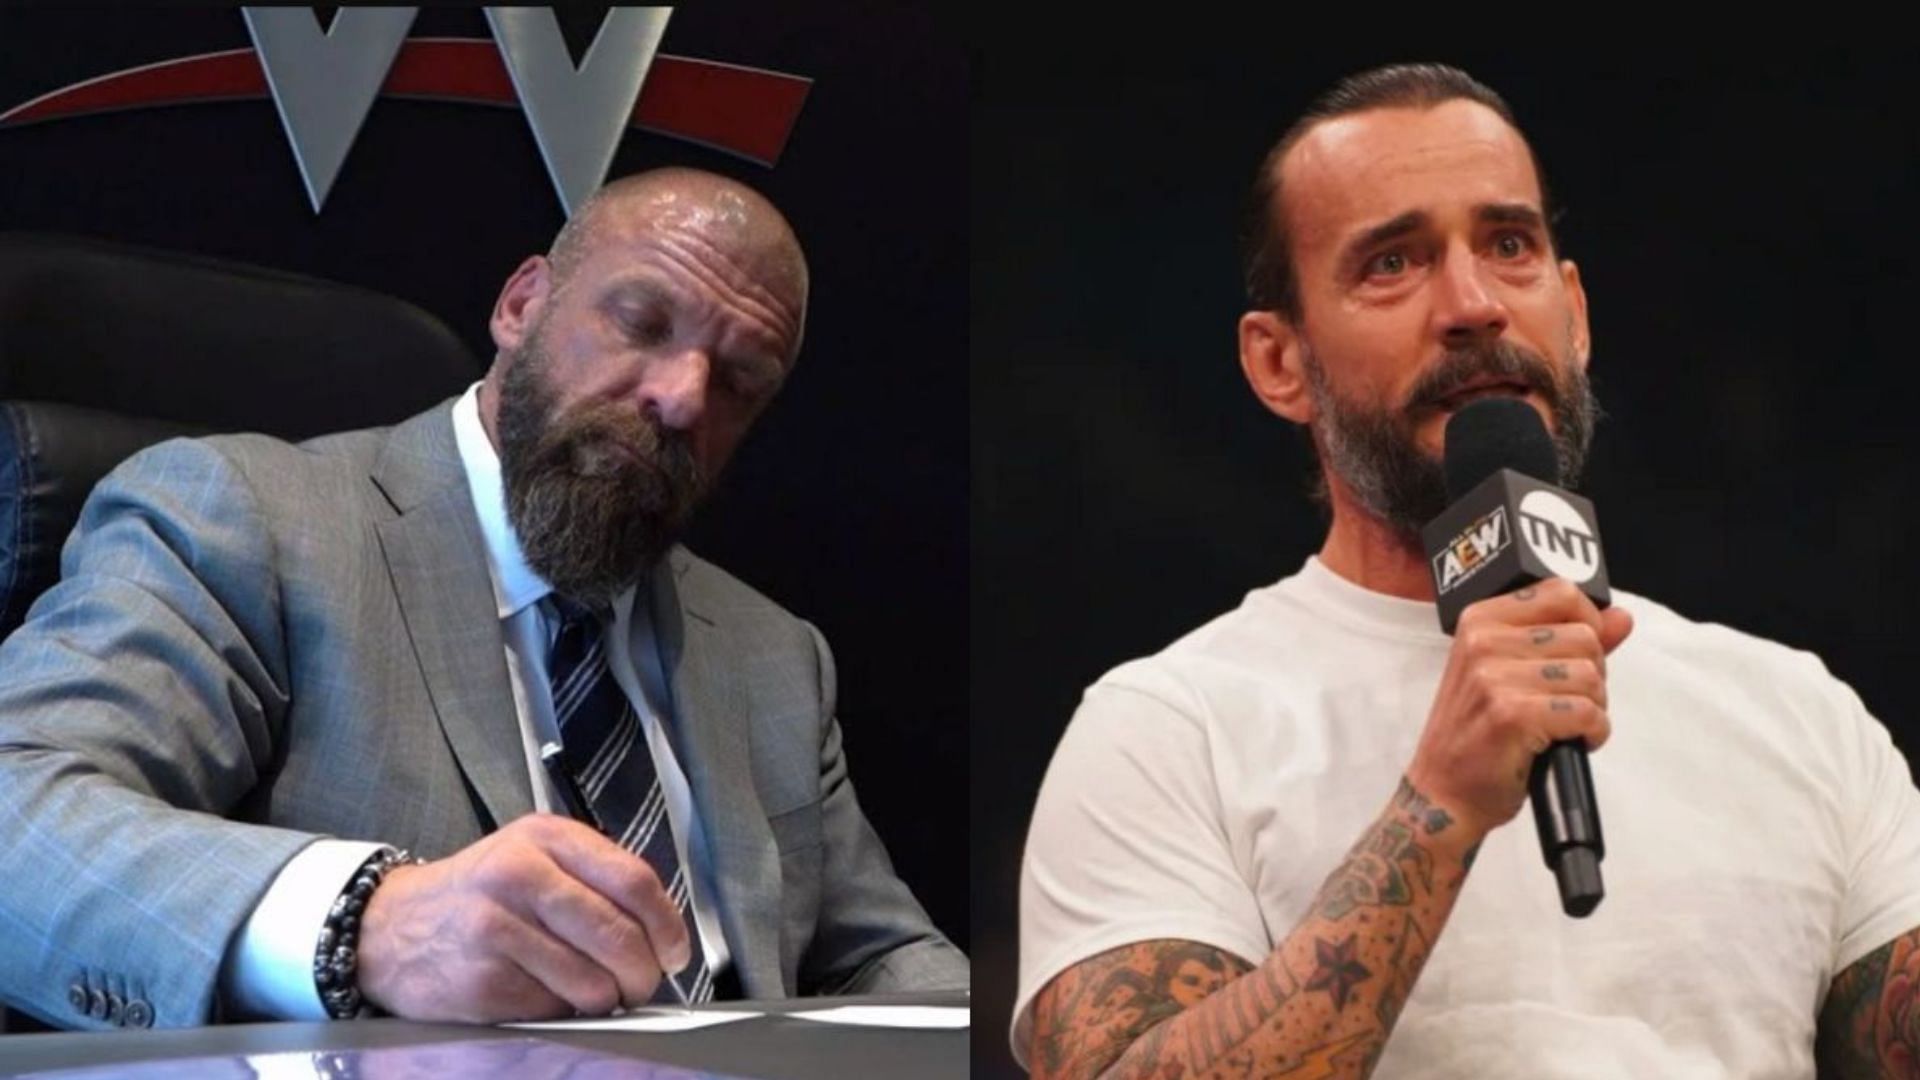 WWE Chief Content Officer Triple H and former AEW Champion CM Punk